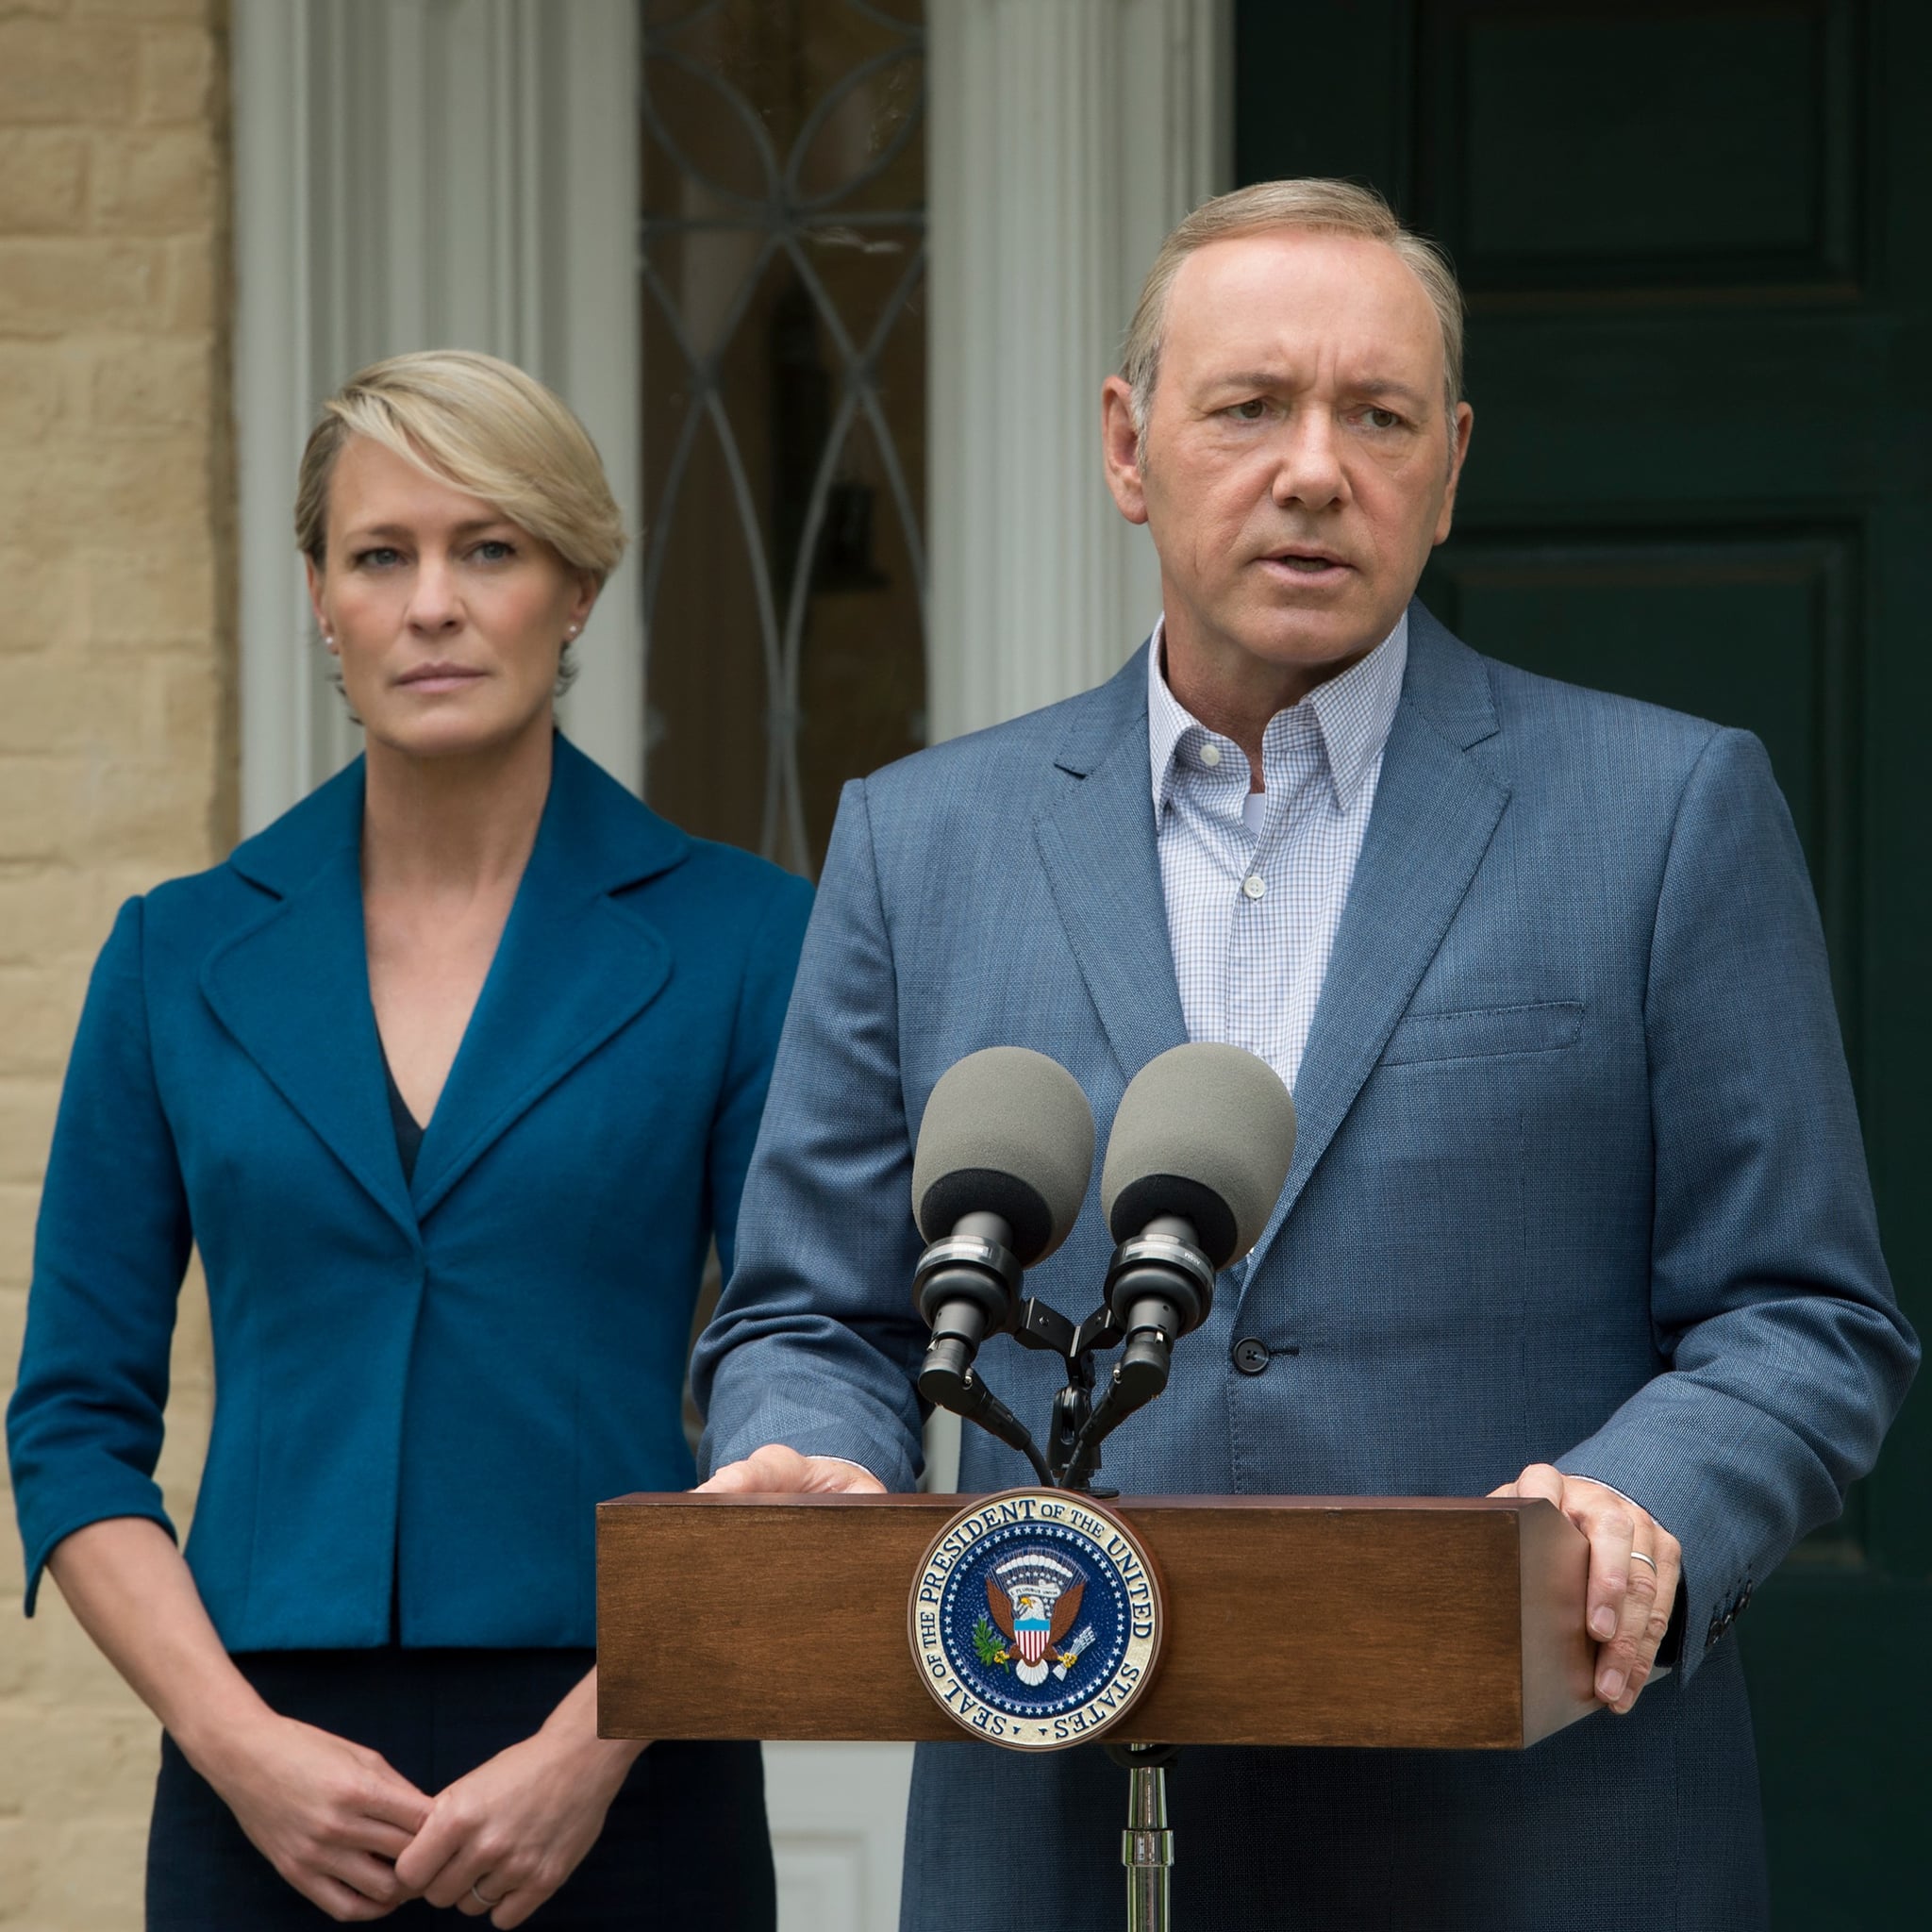 house of cards season 4 episode 1 review